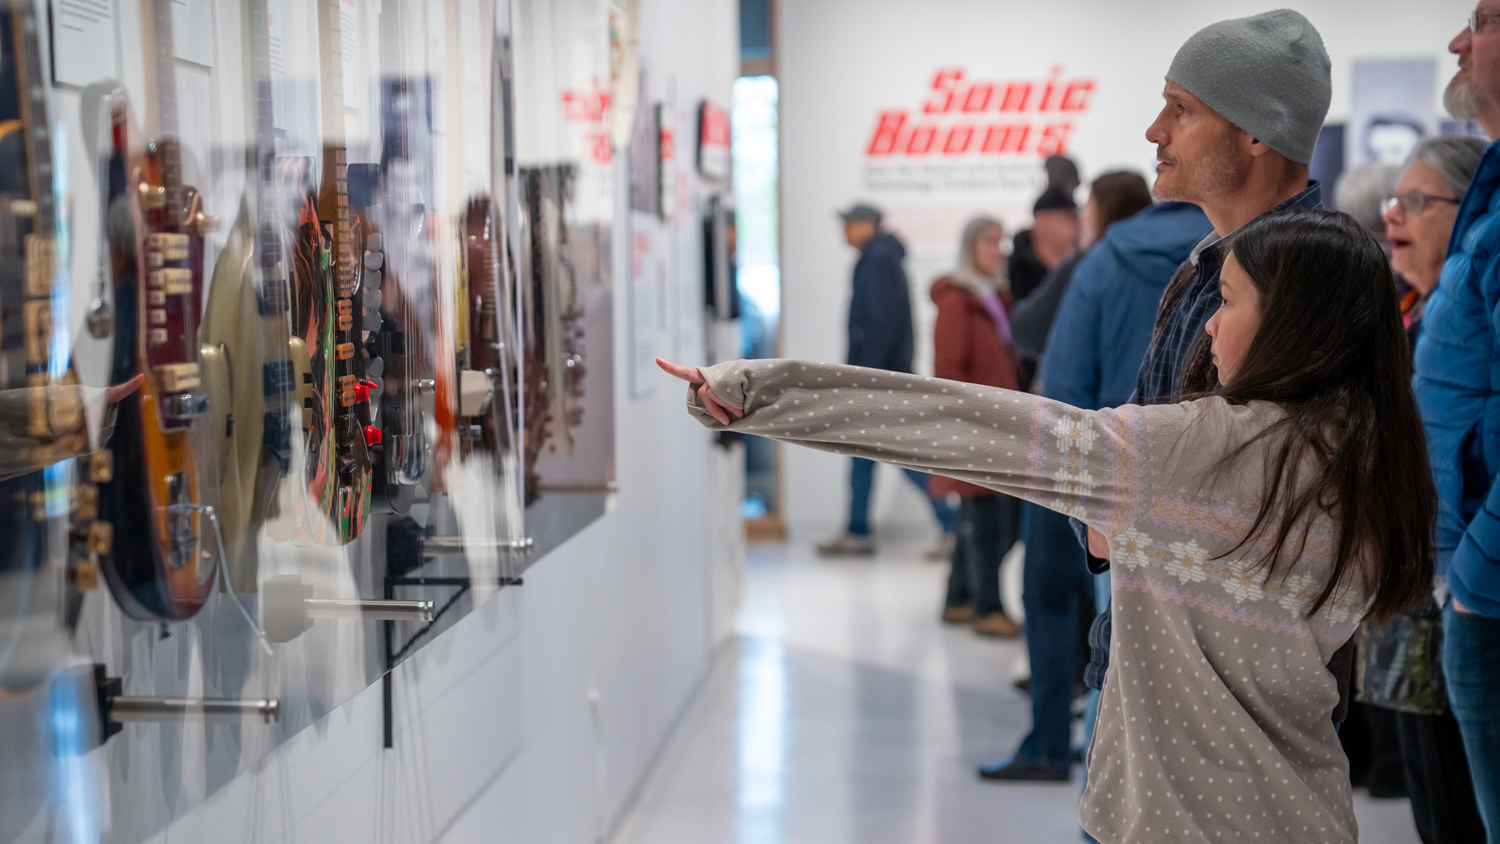 young girl pointing to guitars in the sonic booms exhibition